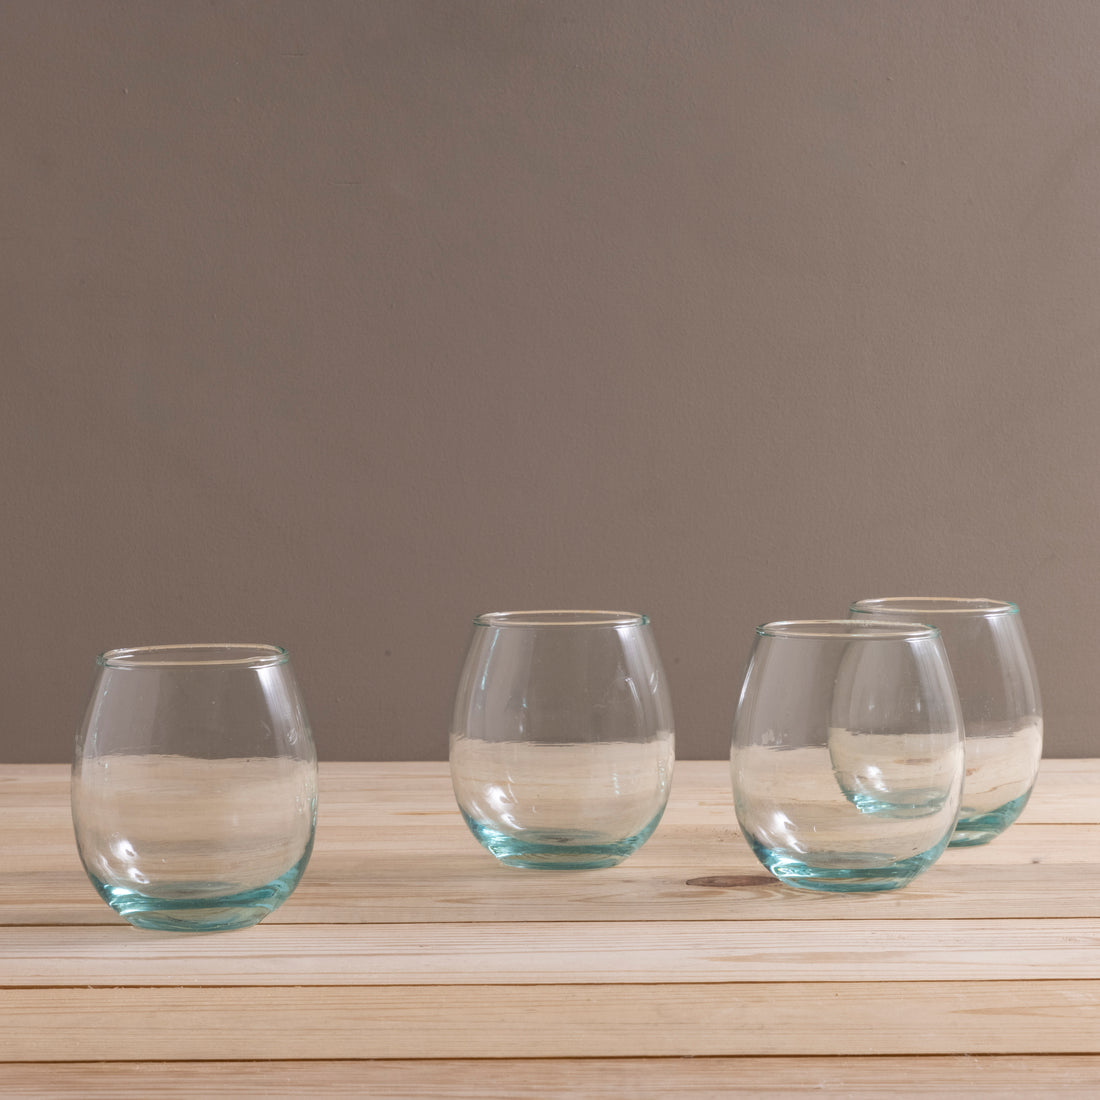 Premium Recycled Margarita Glass, Set of 4 – Be Home